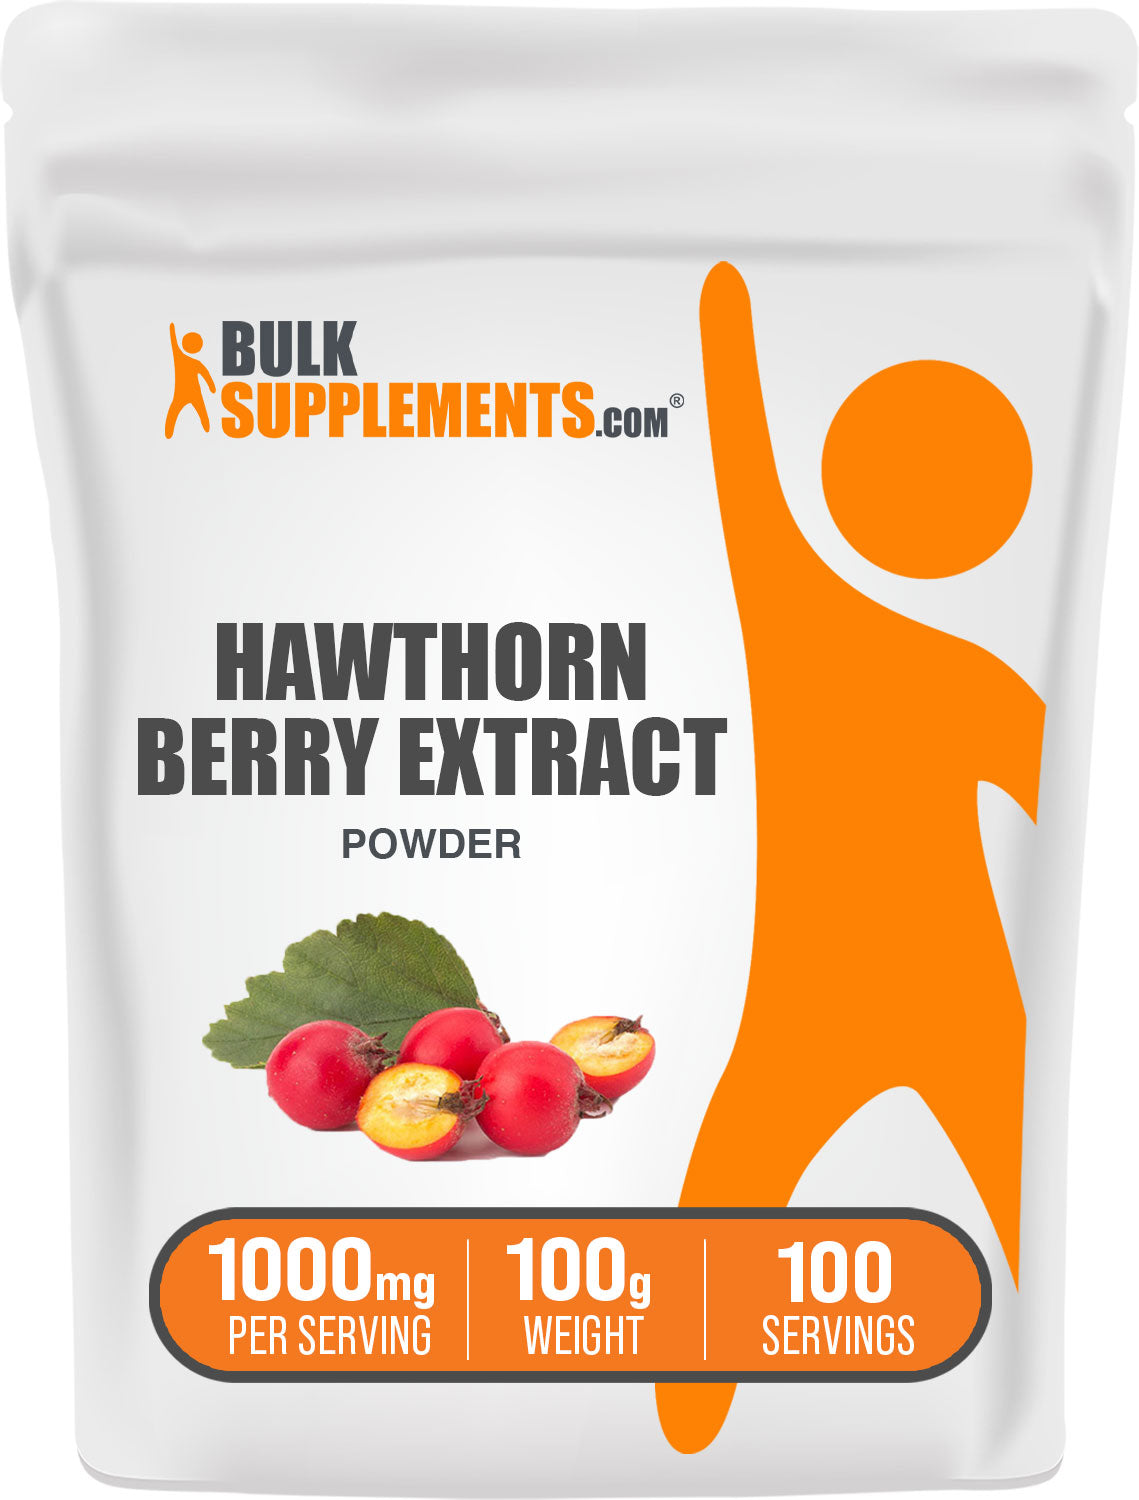 Hawthorn Berry Extract 100g